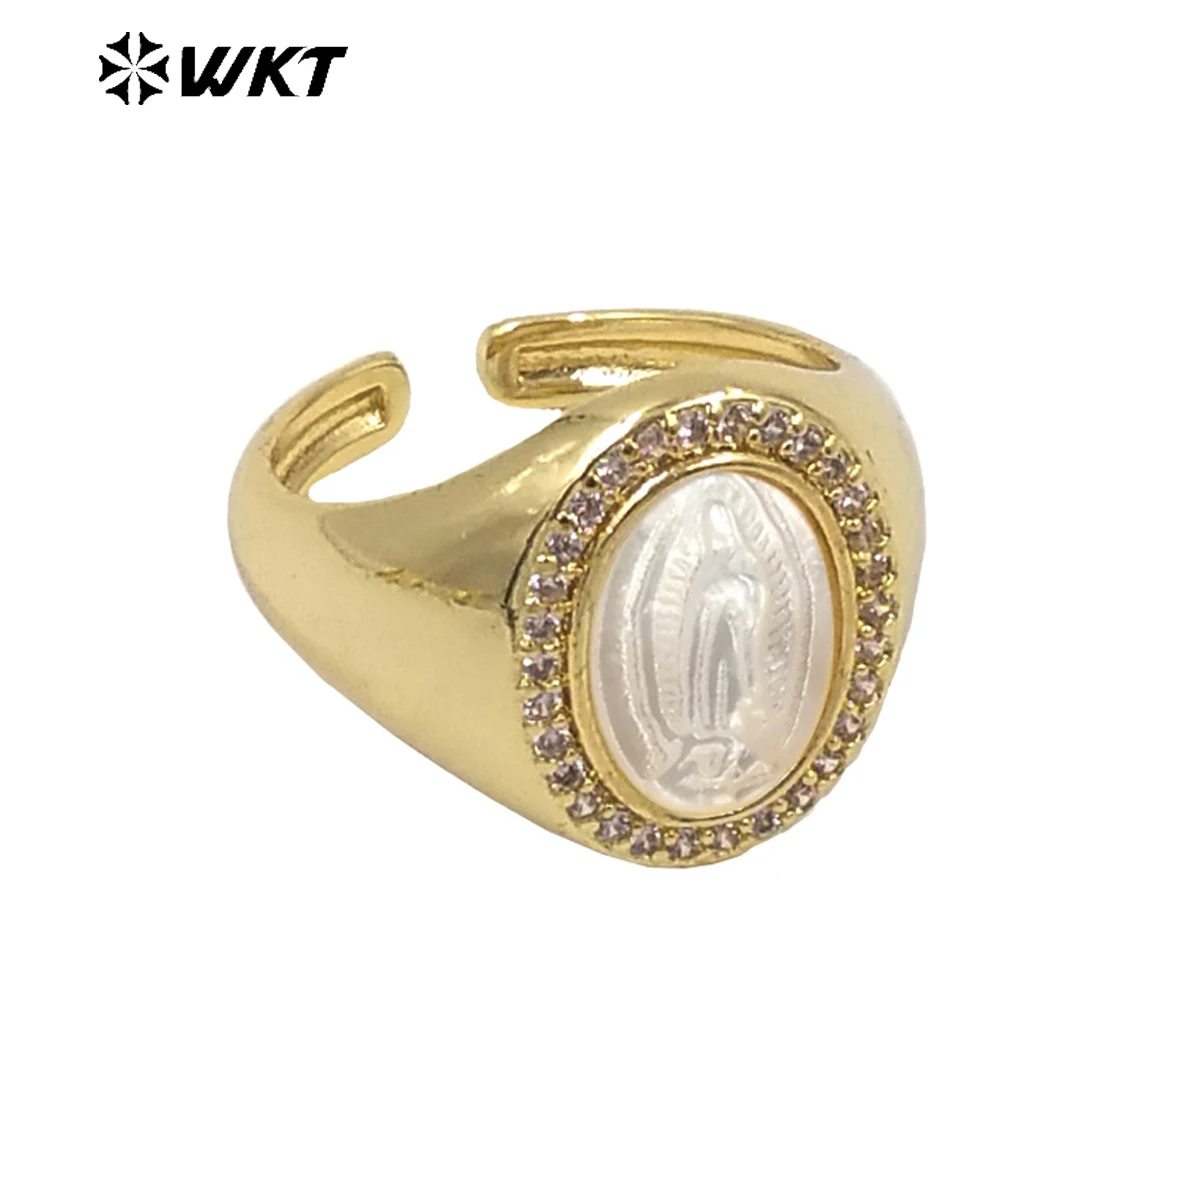 

WT-MR020 WKT Charming Gold Plated Ring Virgin Mary Motif Oval Zircon Inlay White Shell Ring Girl Jewelry Accessories